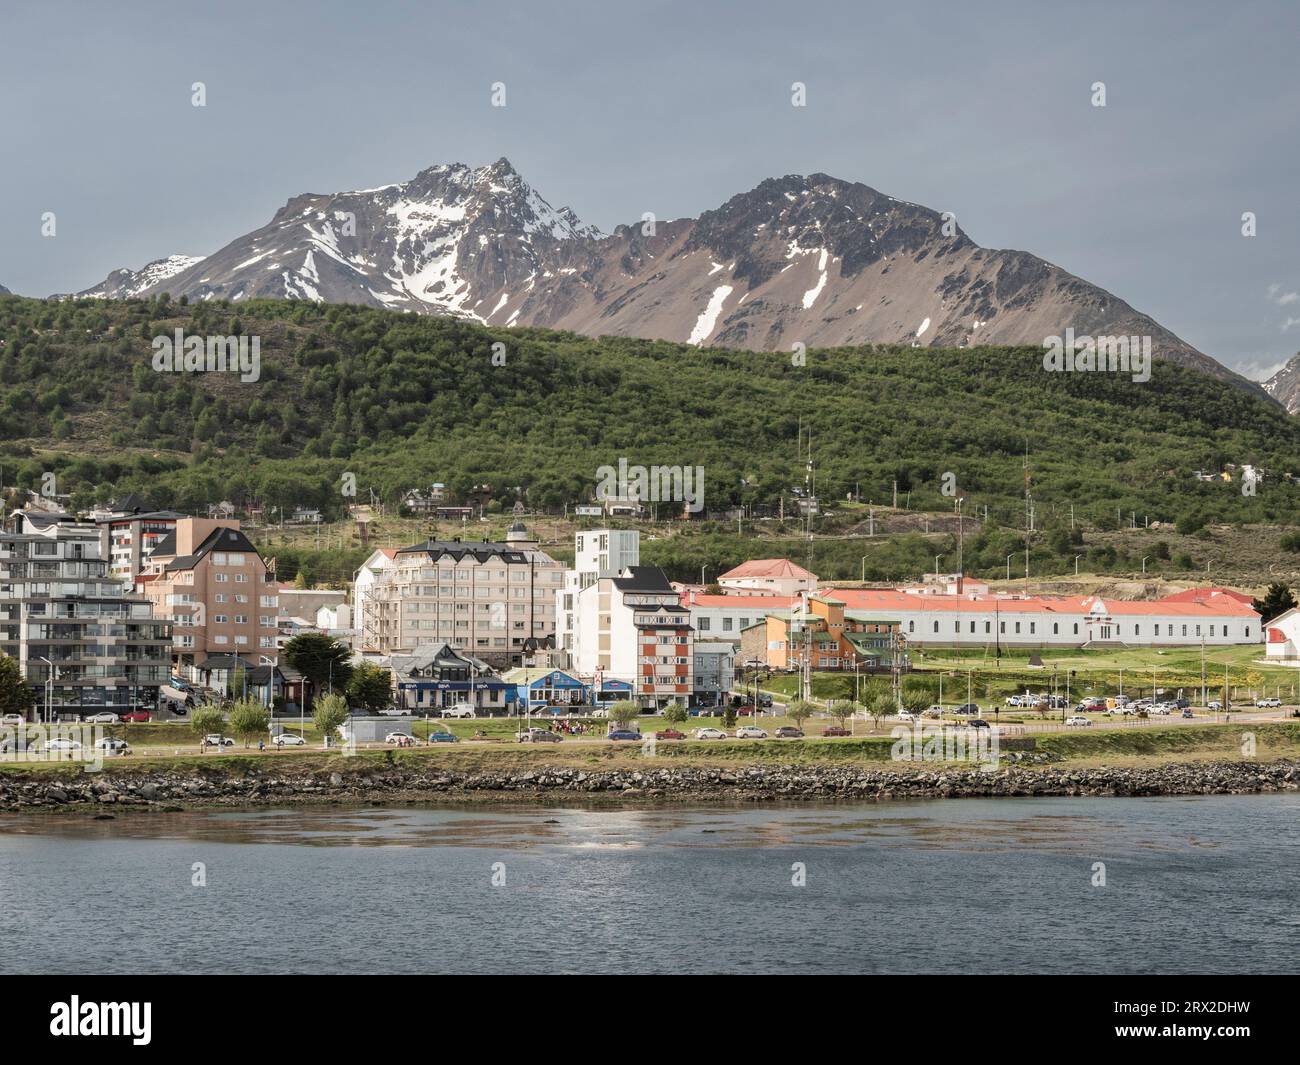 A view of the shoreline of Ushuaia in the Beagle Channel, Tierra del Fuego, Argentina, South America Stock Photo